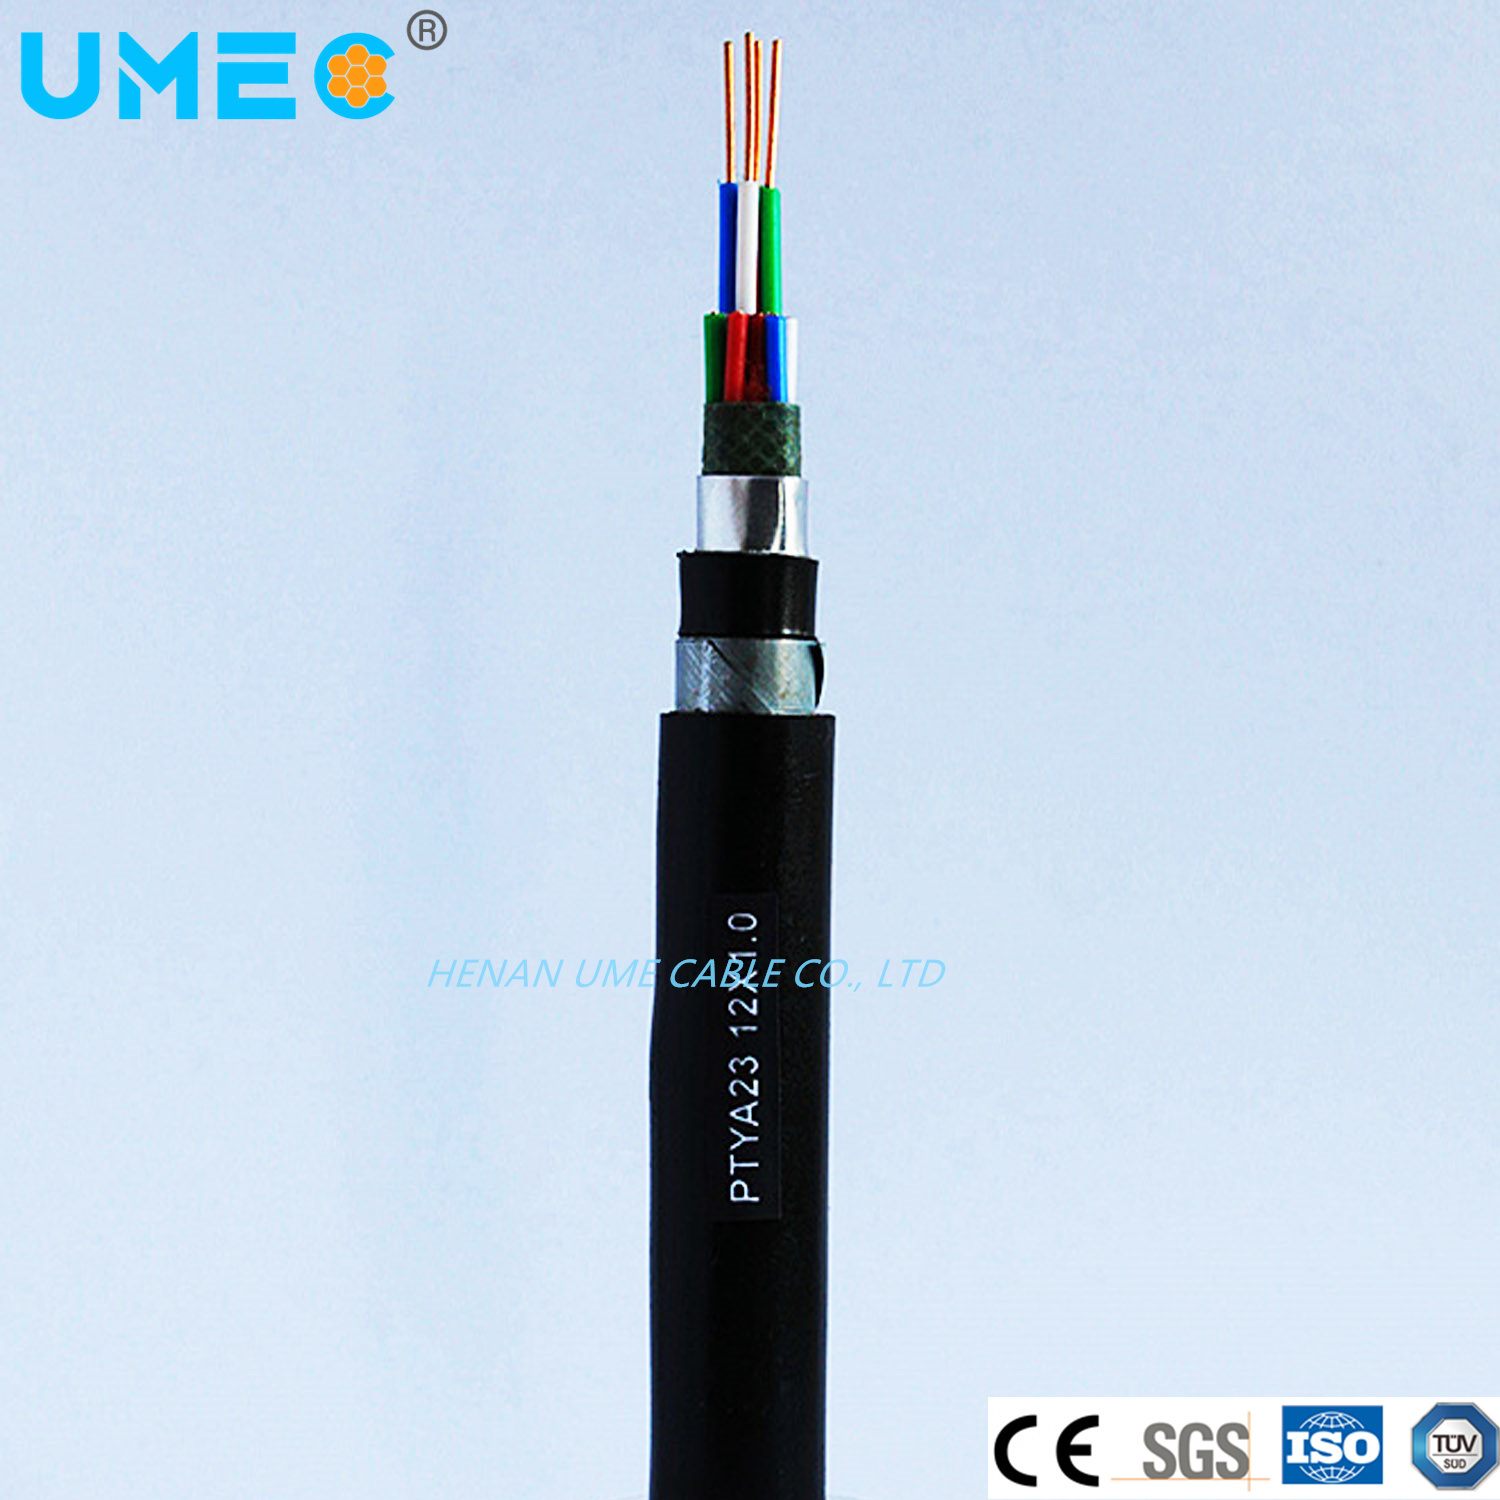 Digital PE Sheath Multi Conductor Railway Signaling System Cables 1.0 Copper Conductor 4-61X1.0mm Electric Cable